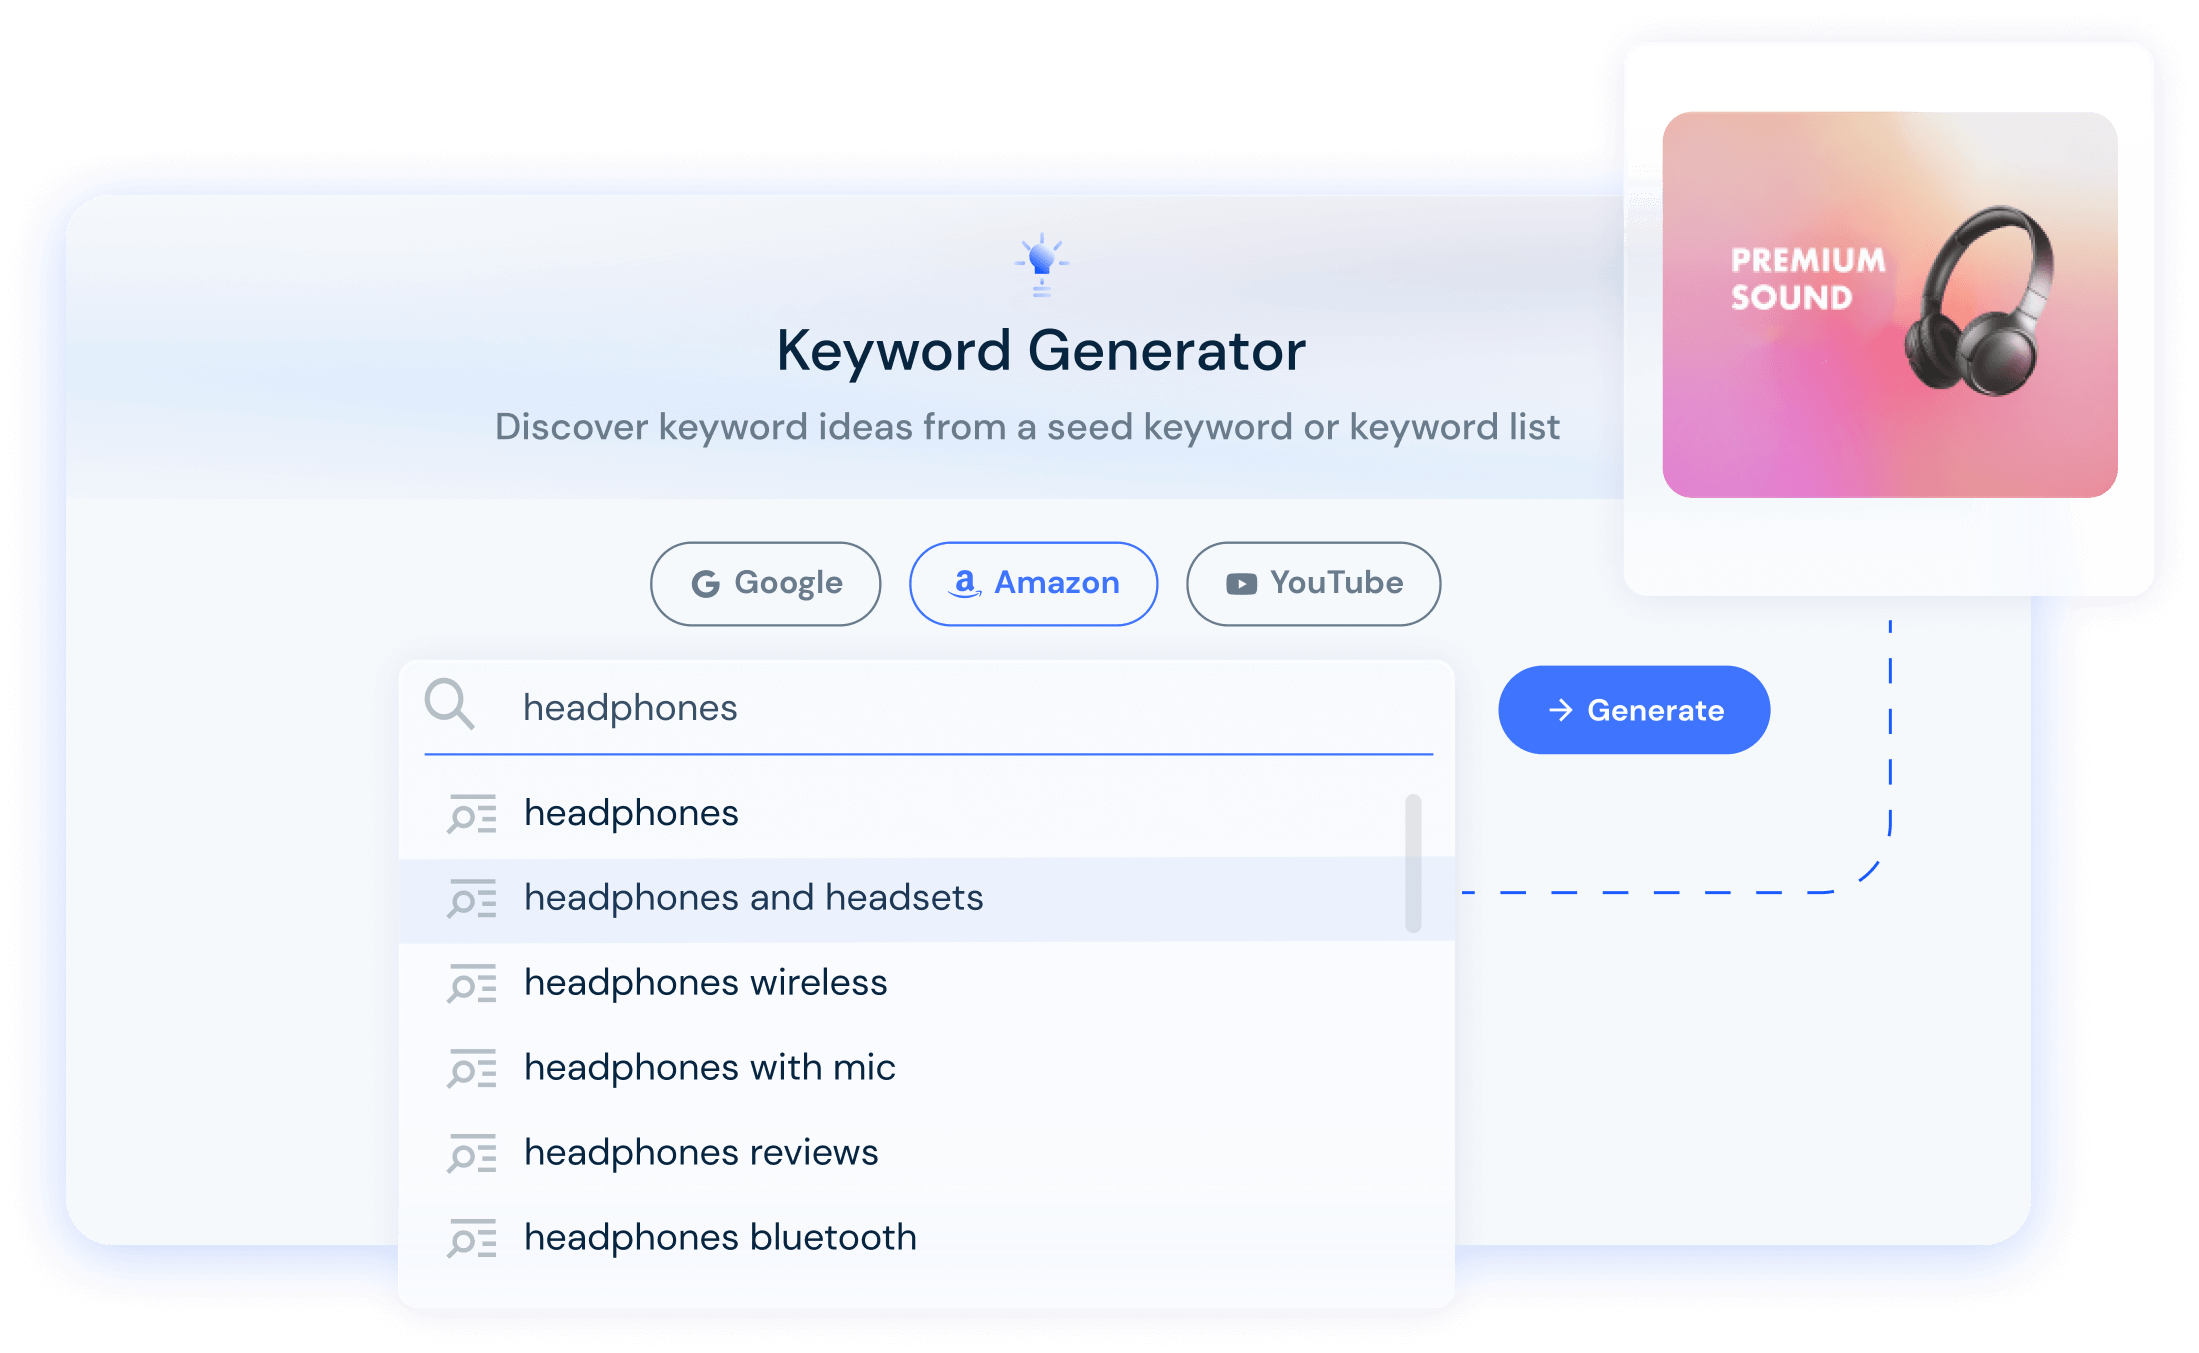 Generate keywords from Google, Amazon and YouTube